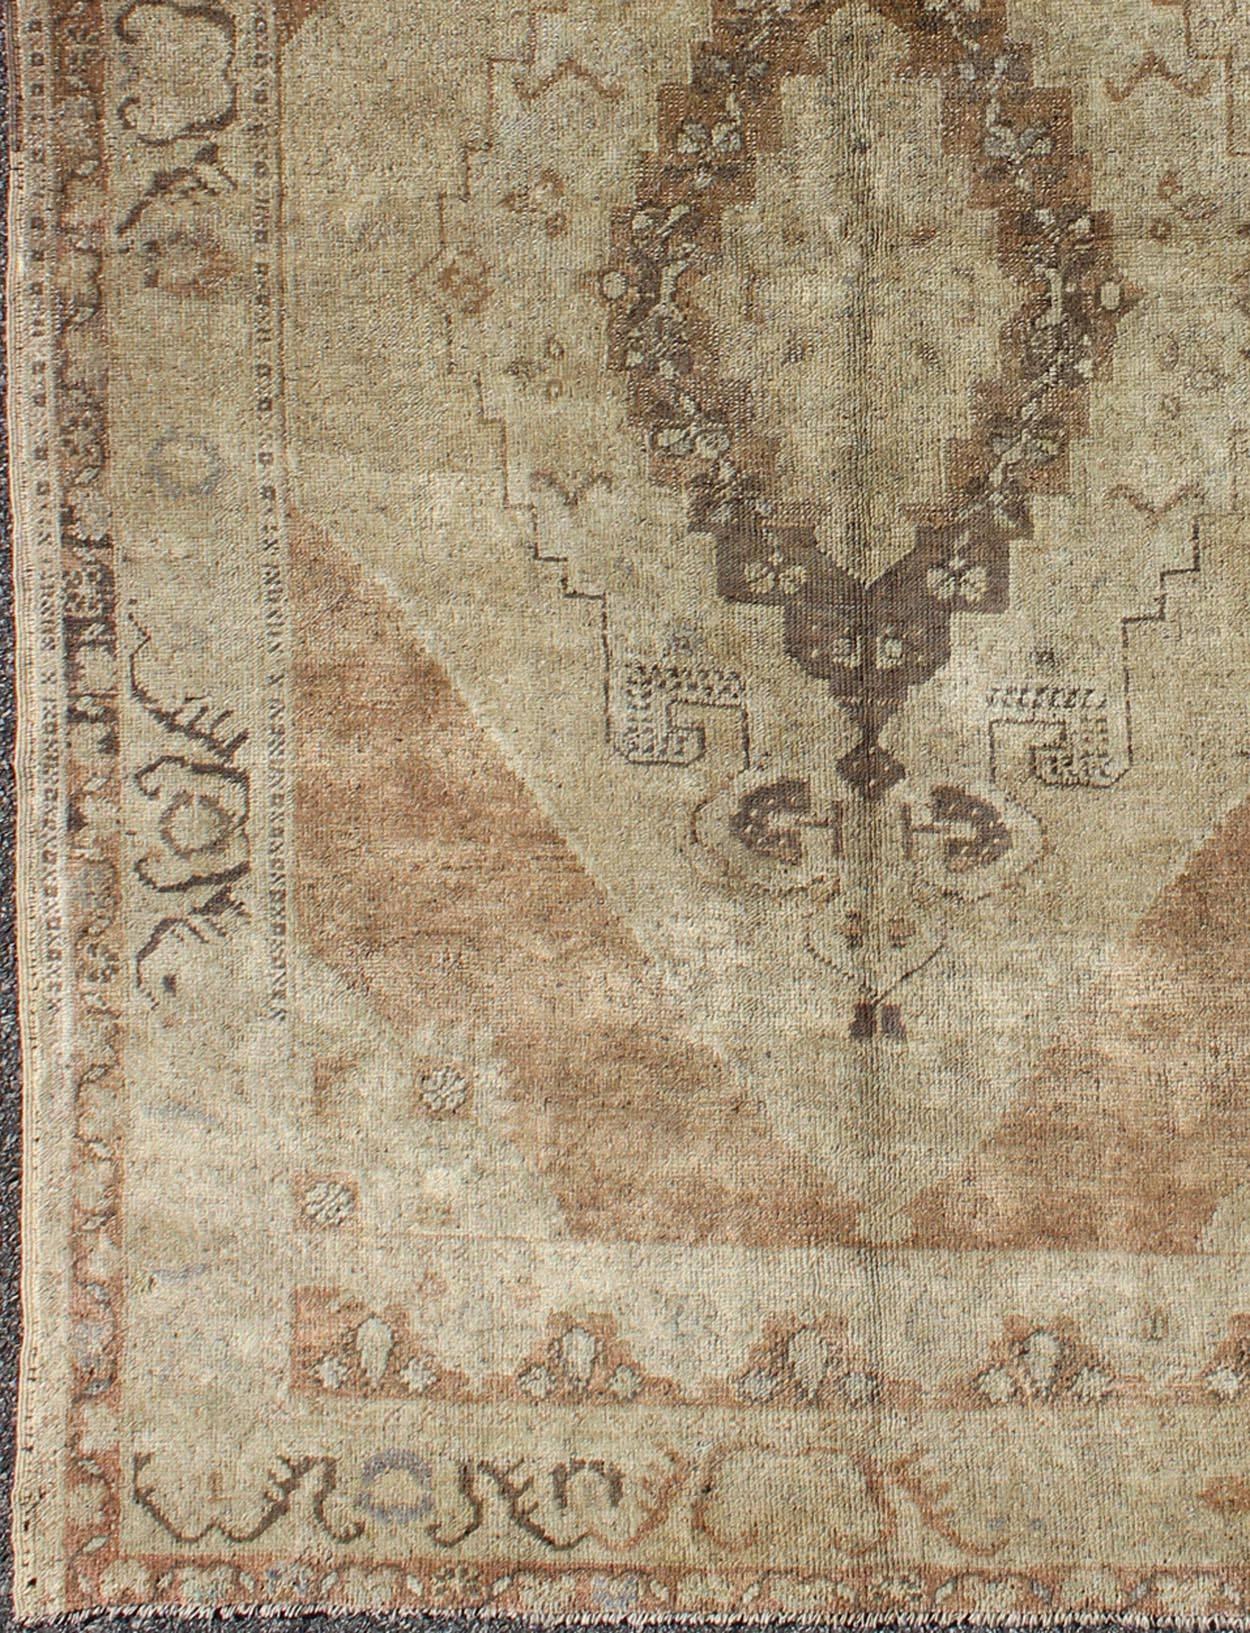 This uniquely colored Oushak contains subtle tones of taupe, beige and green, which are highlighted by charcoal and mocha colors. The elegant center medallion accentuates a botanic theme and is surrounded by defined outlines. Through both